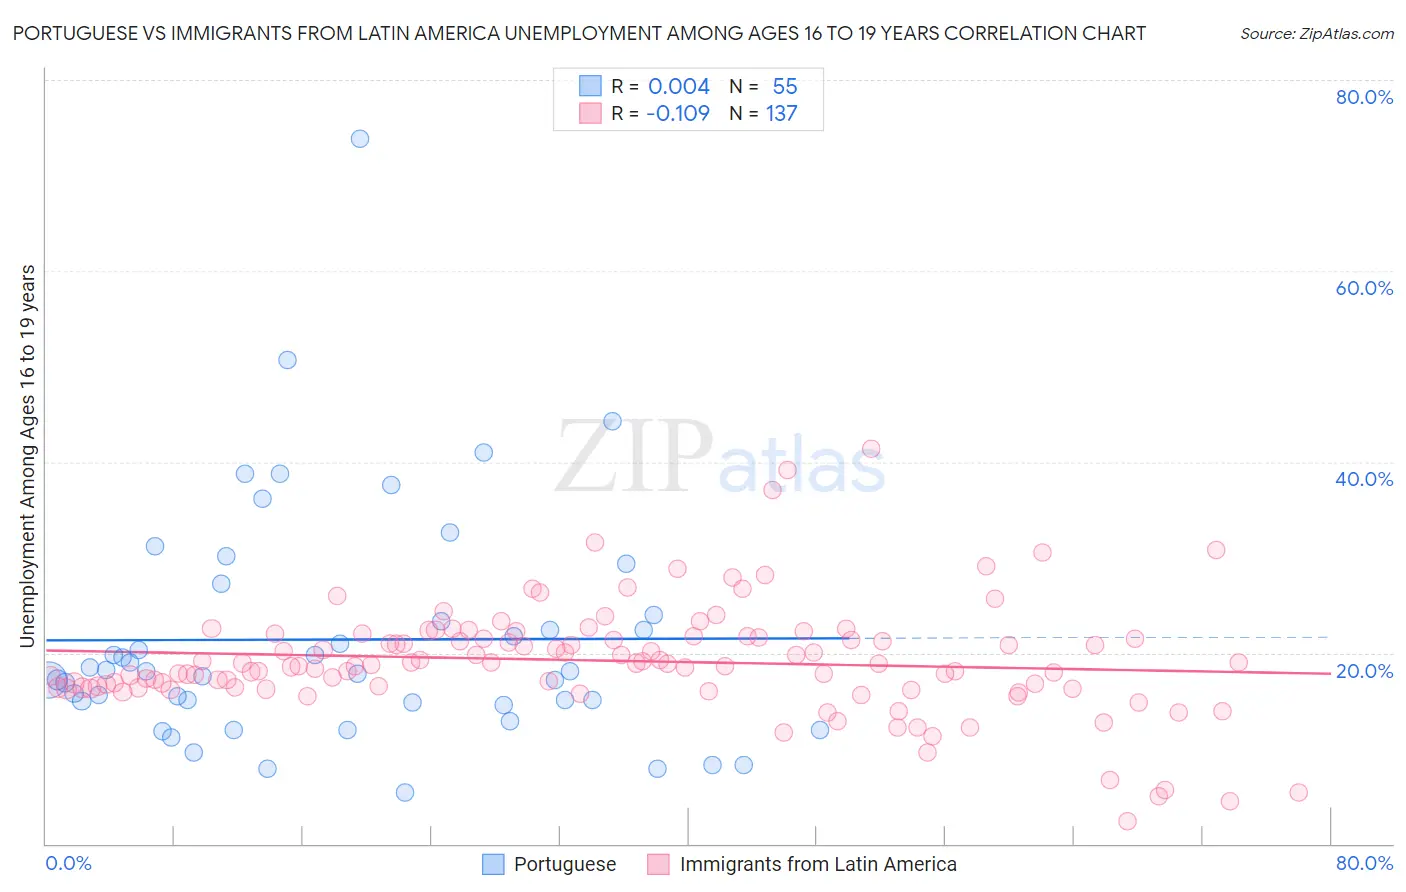 Portuguese vs Immigrants from Latin America Unemployment Among Ages 16 to 19 years